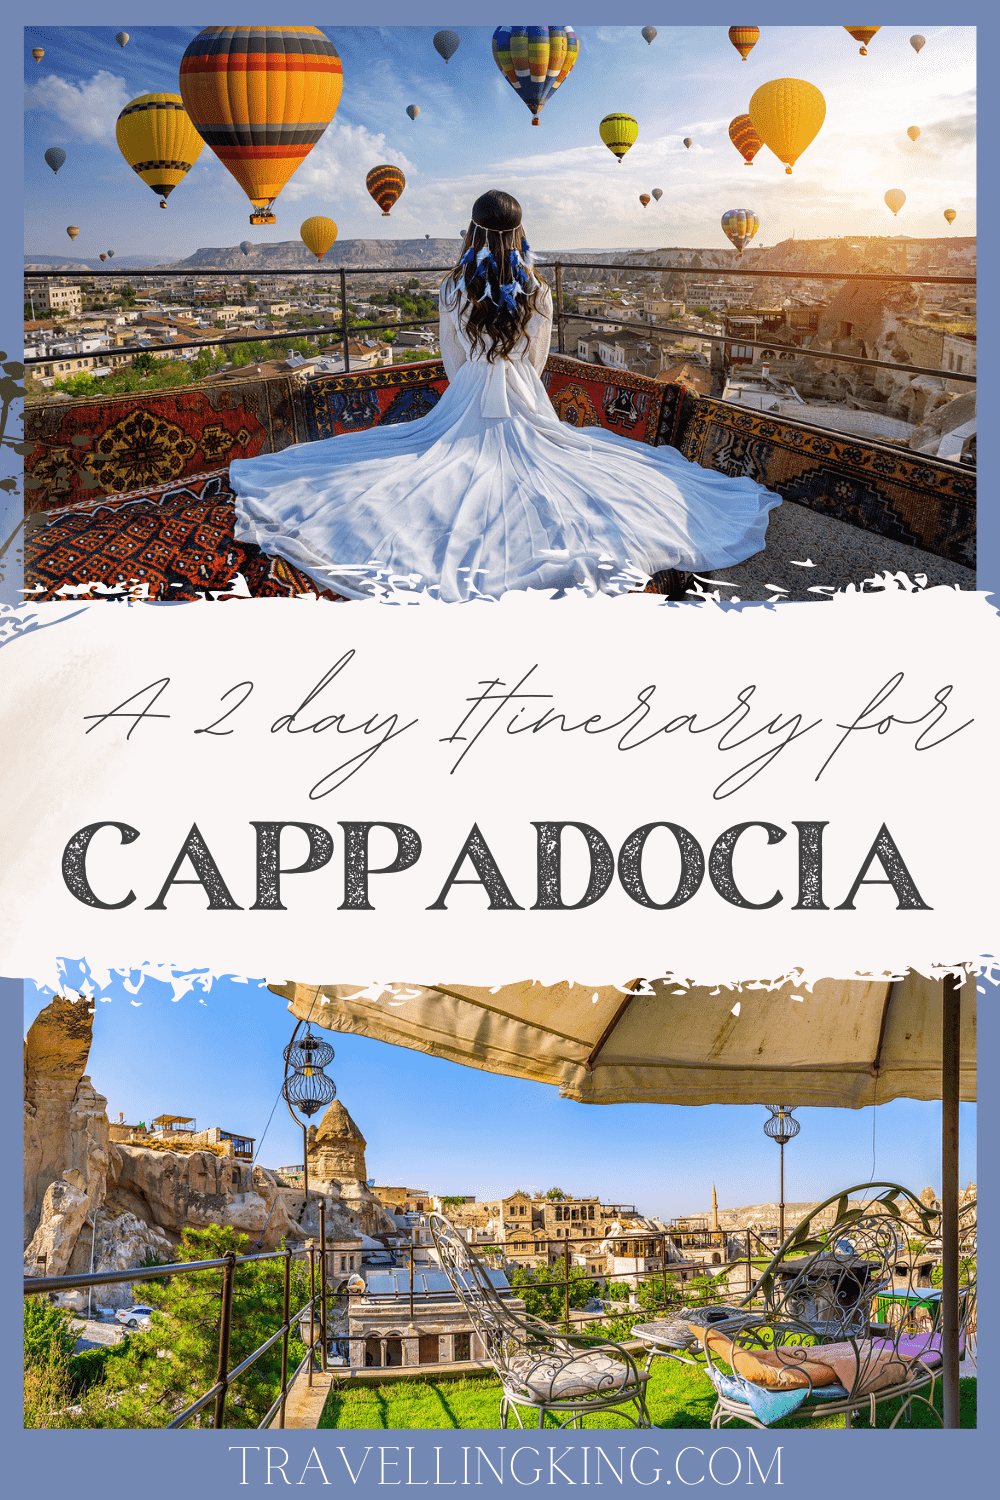 48 hours in Cappadocia - A 2 day Itinerary